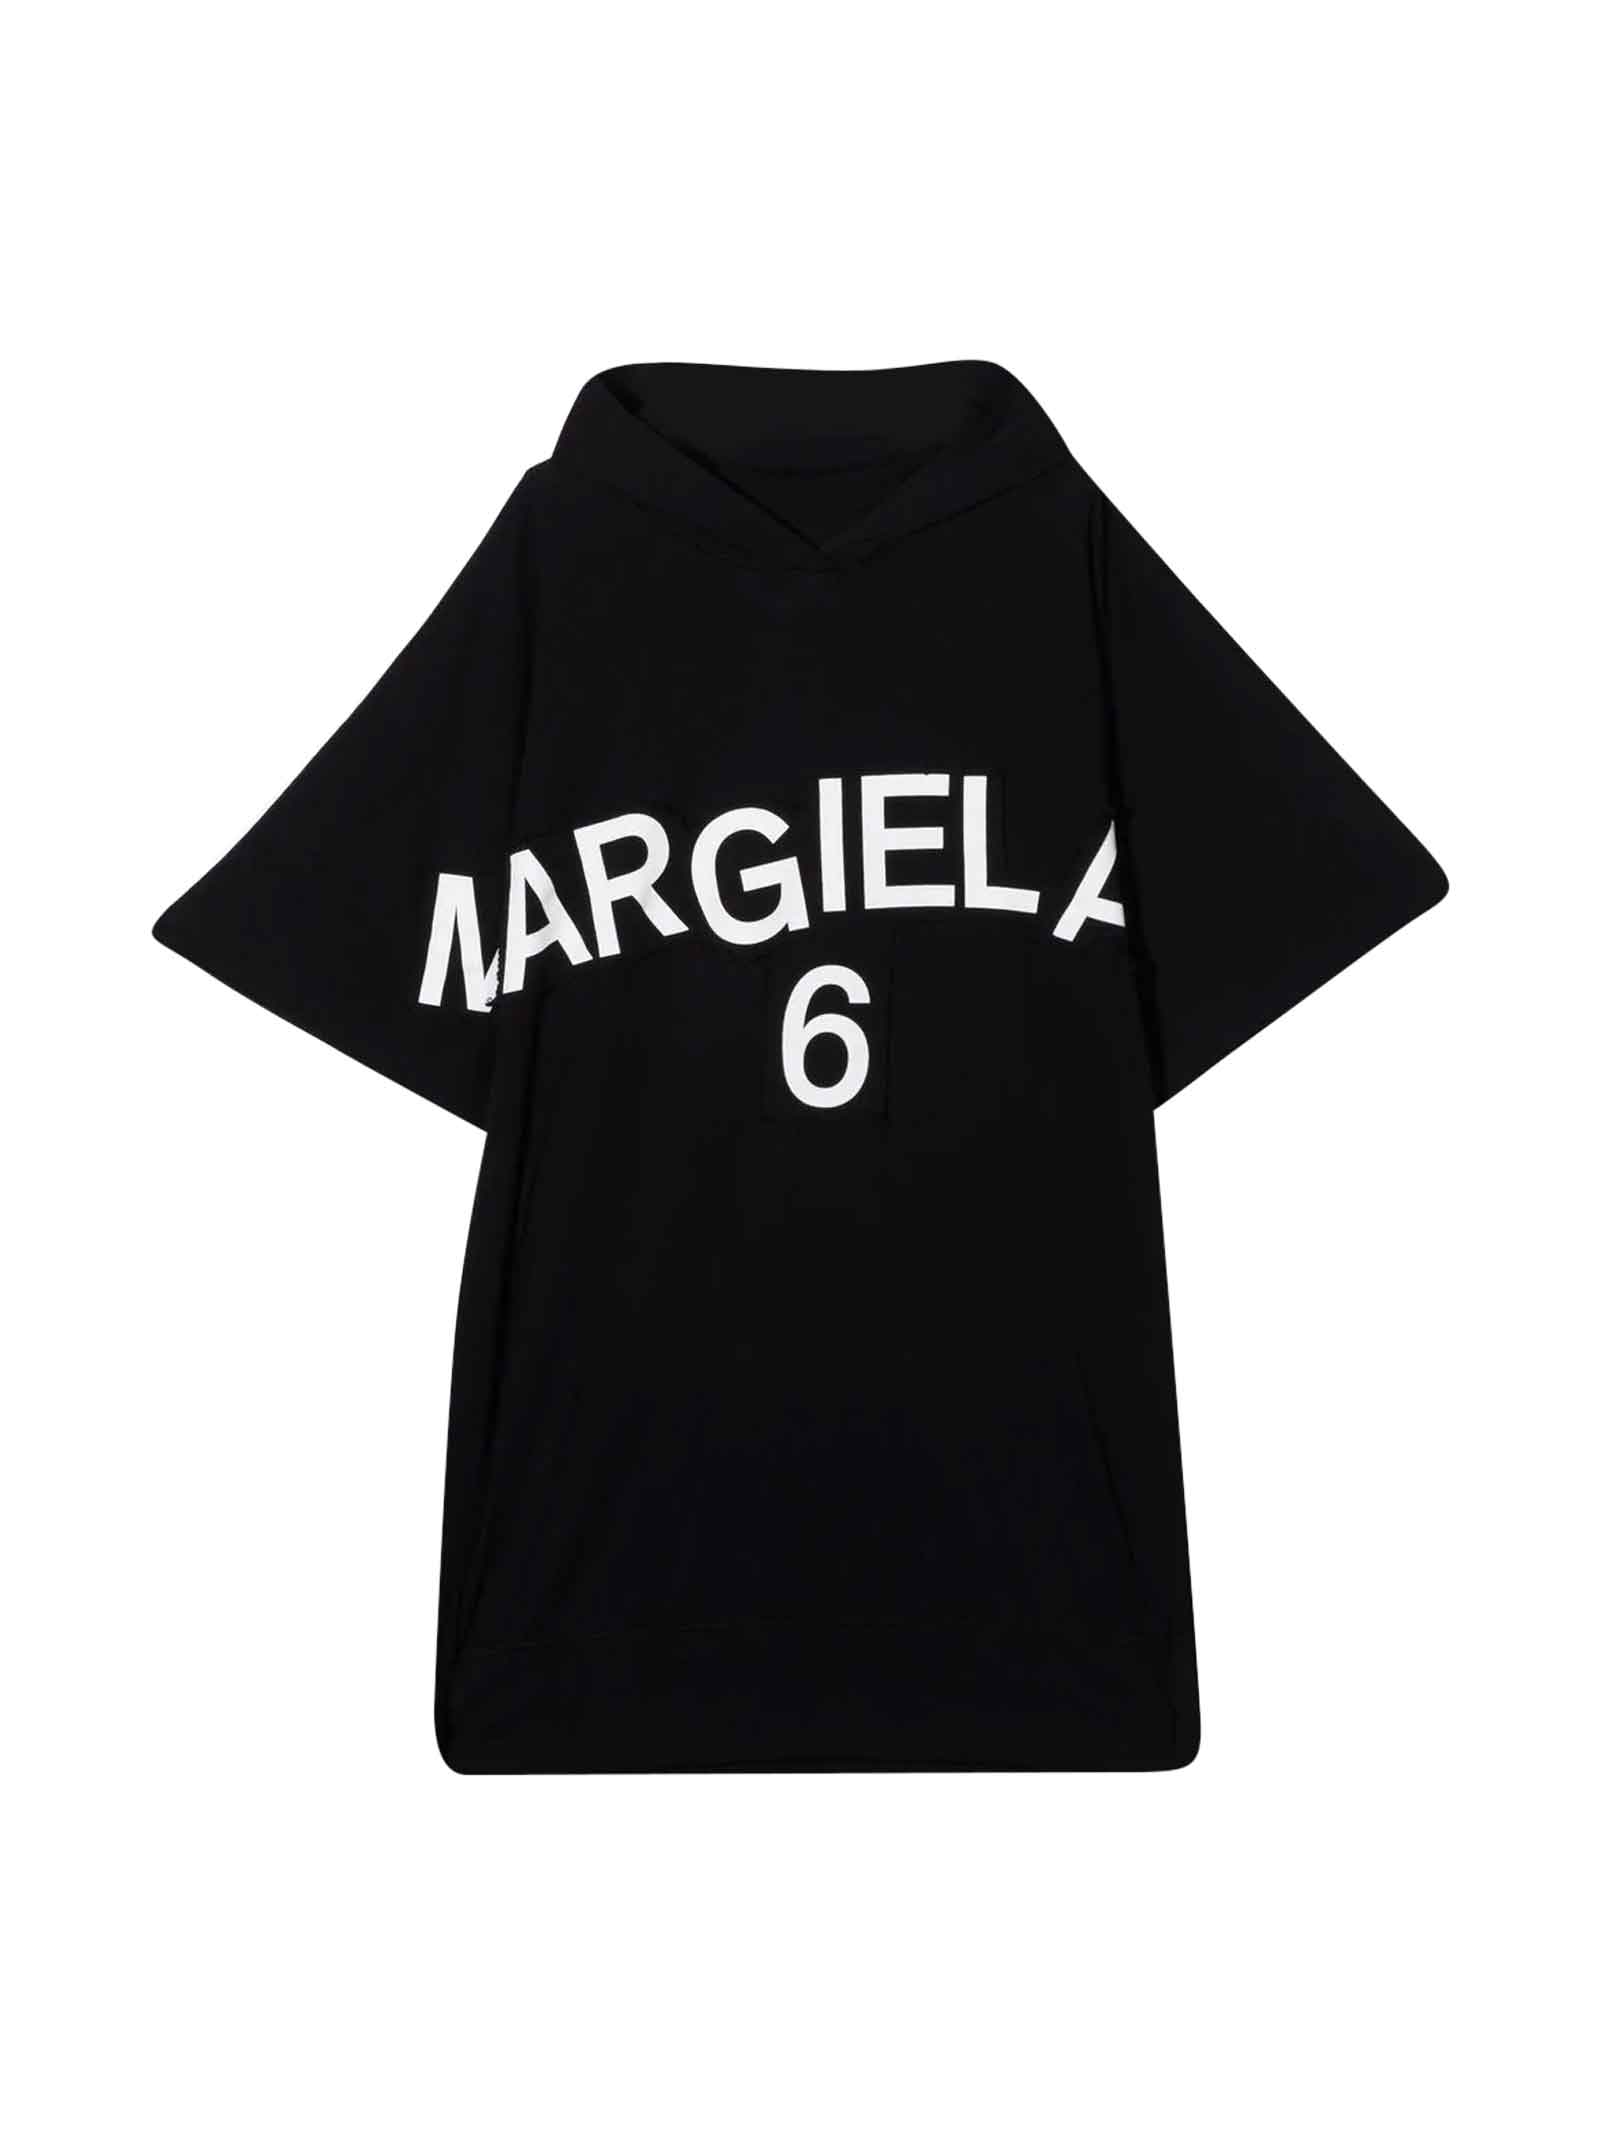 Black Teen Girl Dress With Logo Print On The White Front, Hood, Short Sleeves And Straight Hem By Mm6 Maison Margiela Kids.